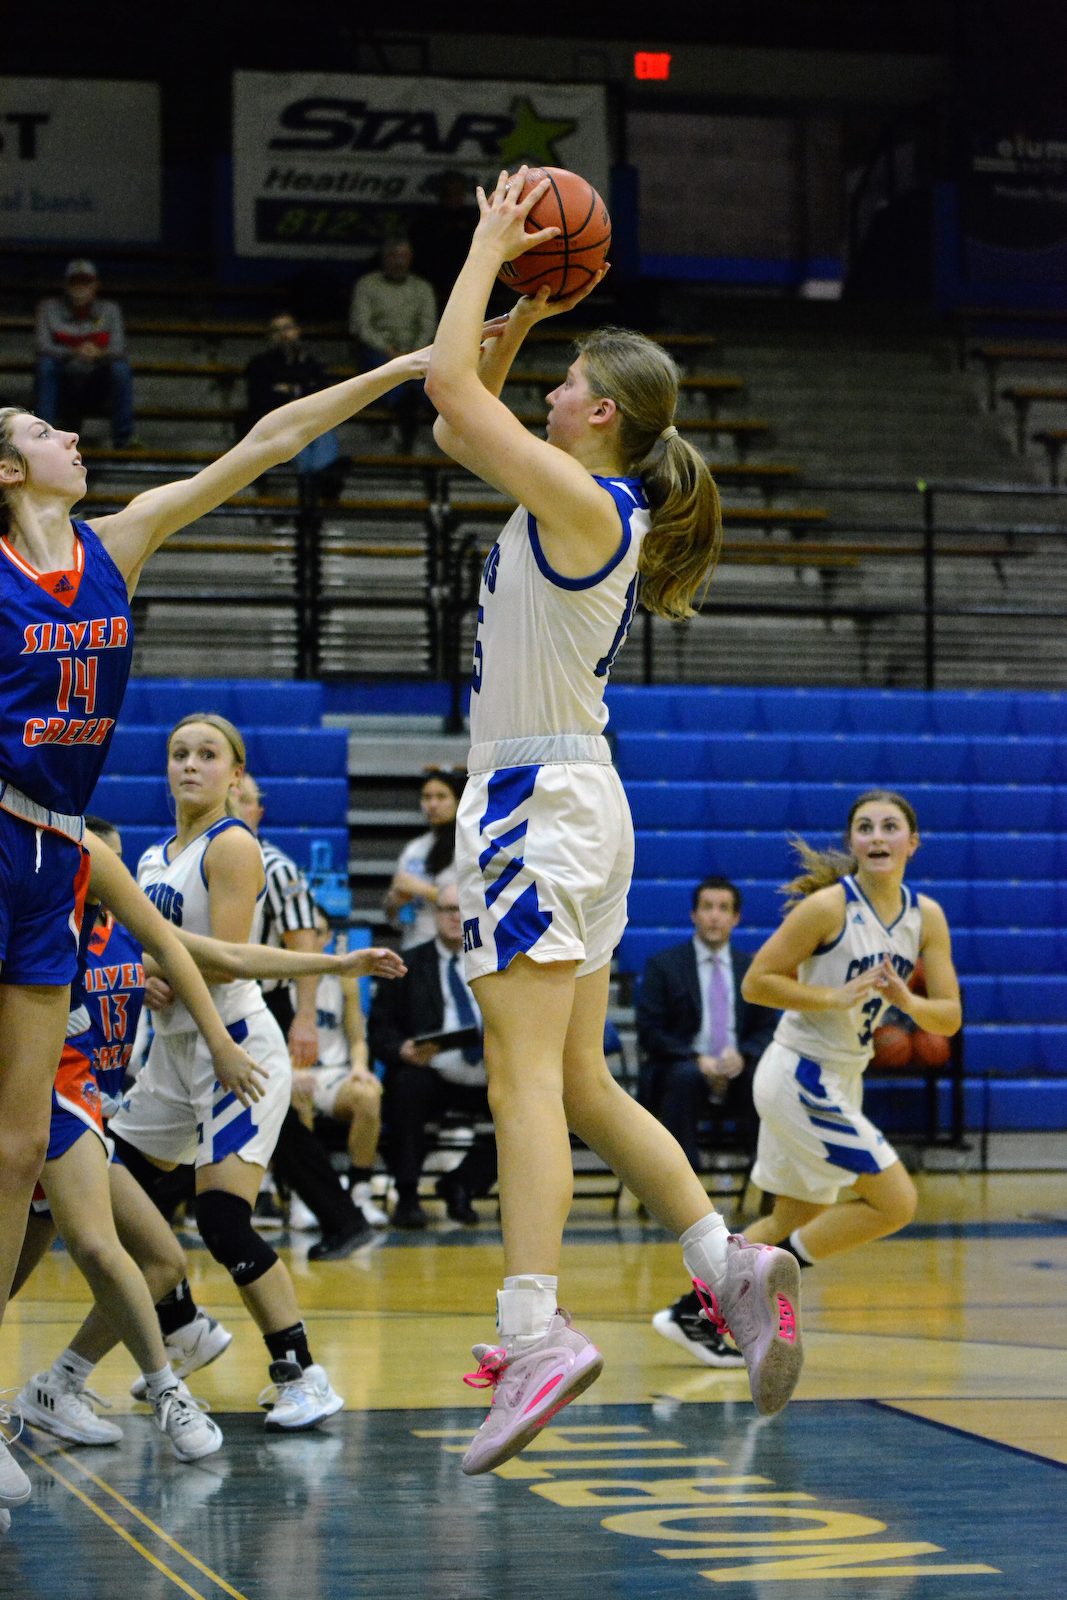 Dogs outlast Silver Creek in girls basketball cover photo